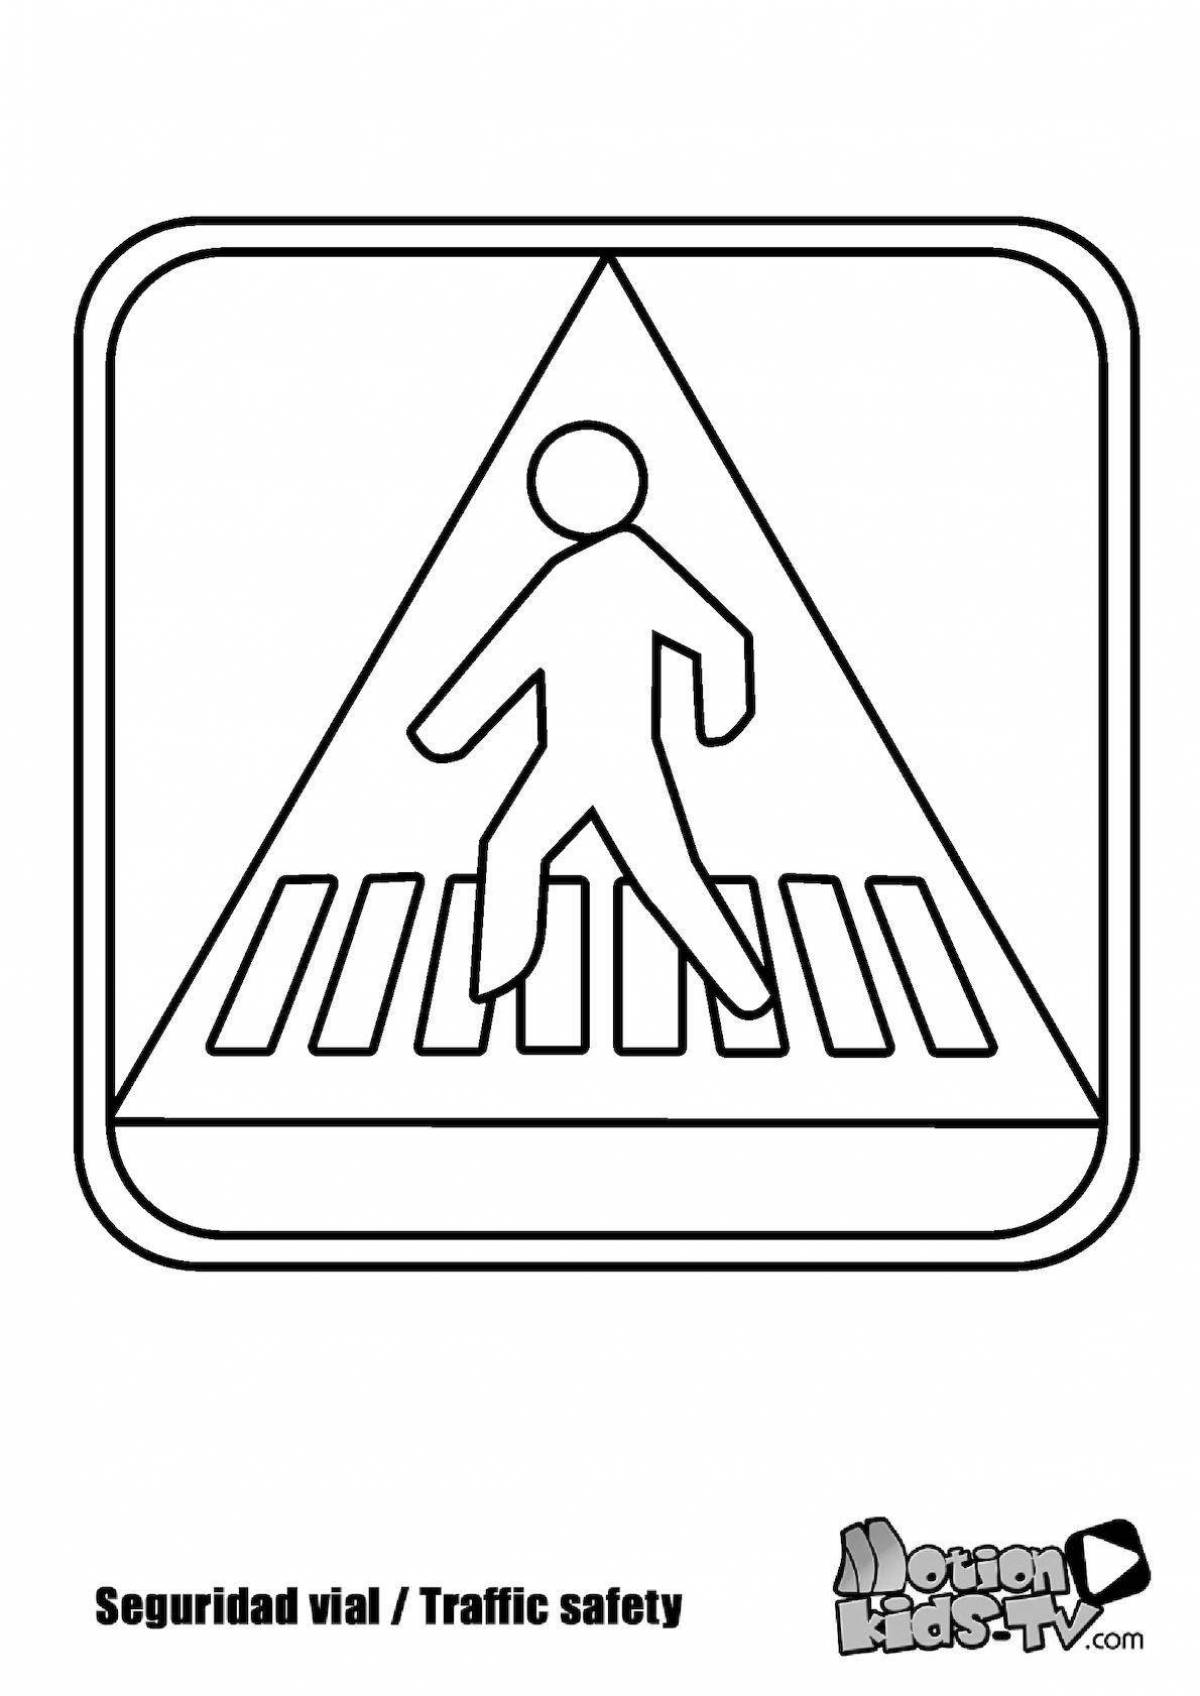 Animated traffic sign for pedestrians